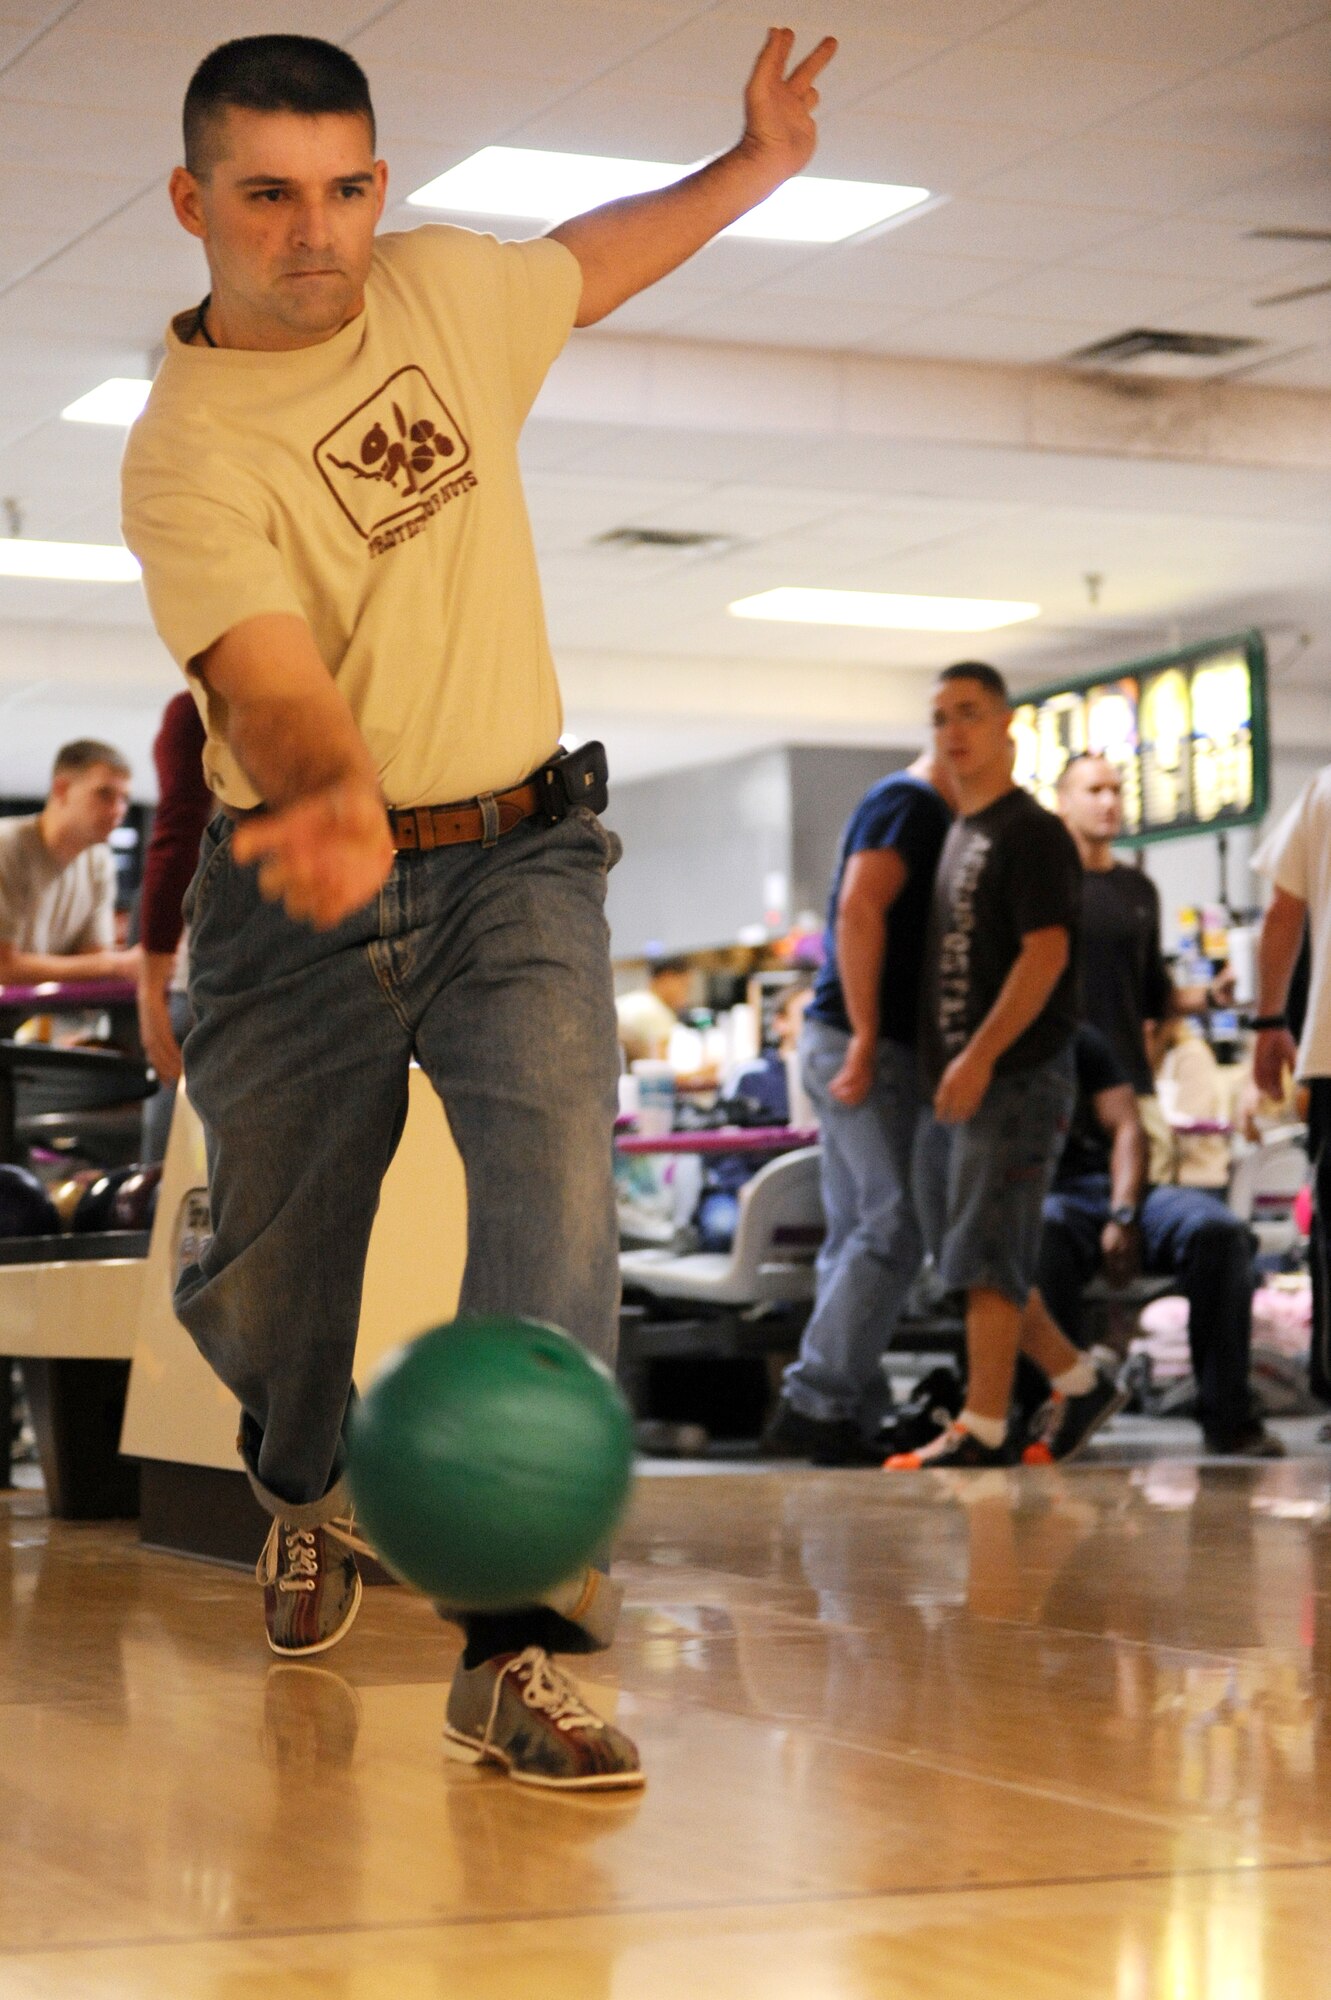 A member of Team Little Rock slings his bowling ball down the lane in hopes of a strike during the base's Combined Federal Campaign bowling tournament fundraiser at the base bowling alley Oct. 23. The CFC fundraising campaign is from Oct. 13 through Nov. 20. (U.S. Air Force Photo by Senior Airman Jim Araos)